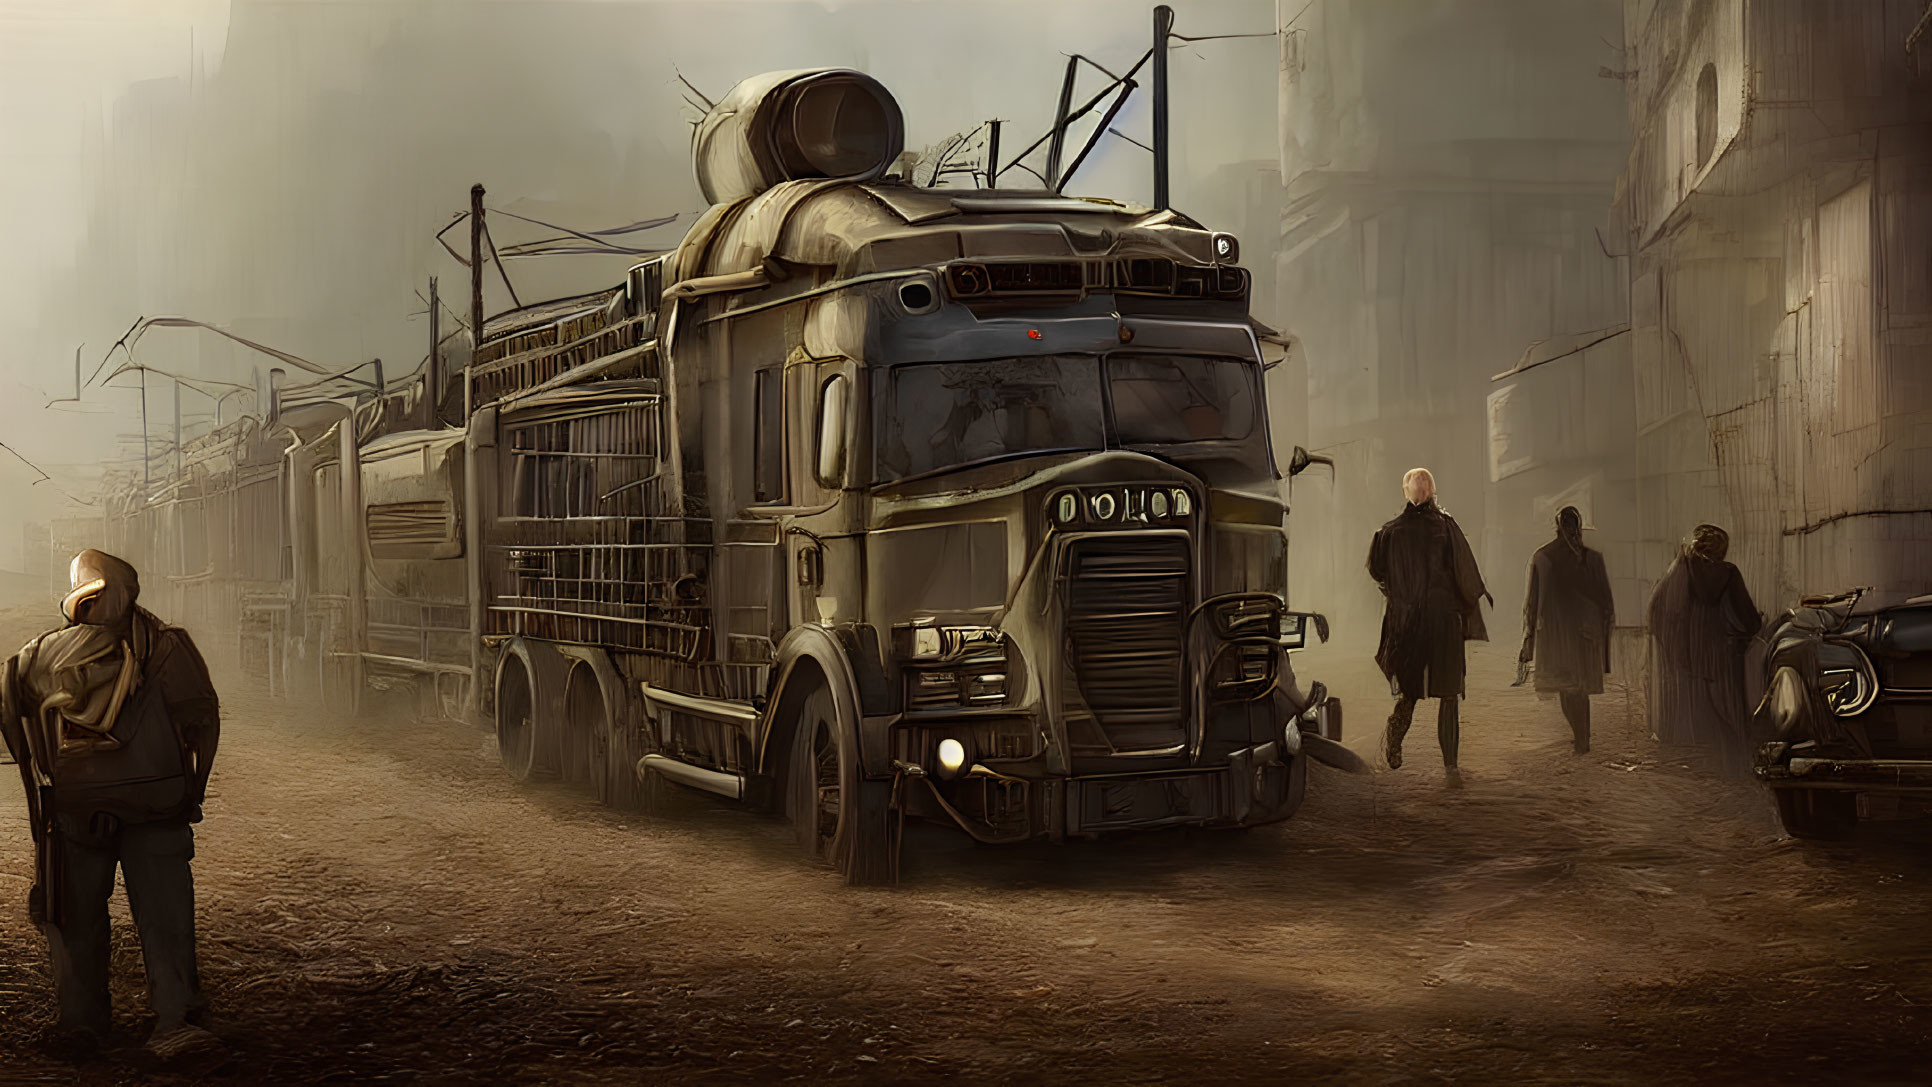 Rugged armored truck and people in desolate, foggy street